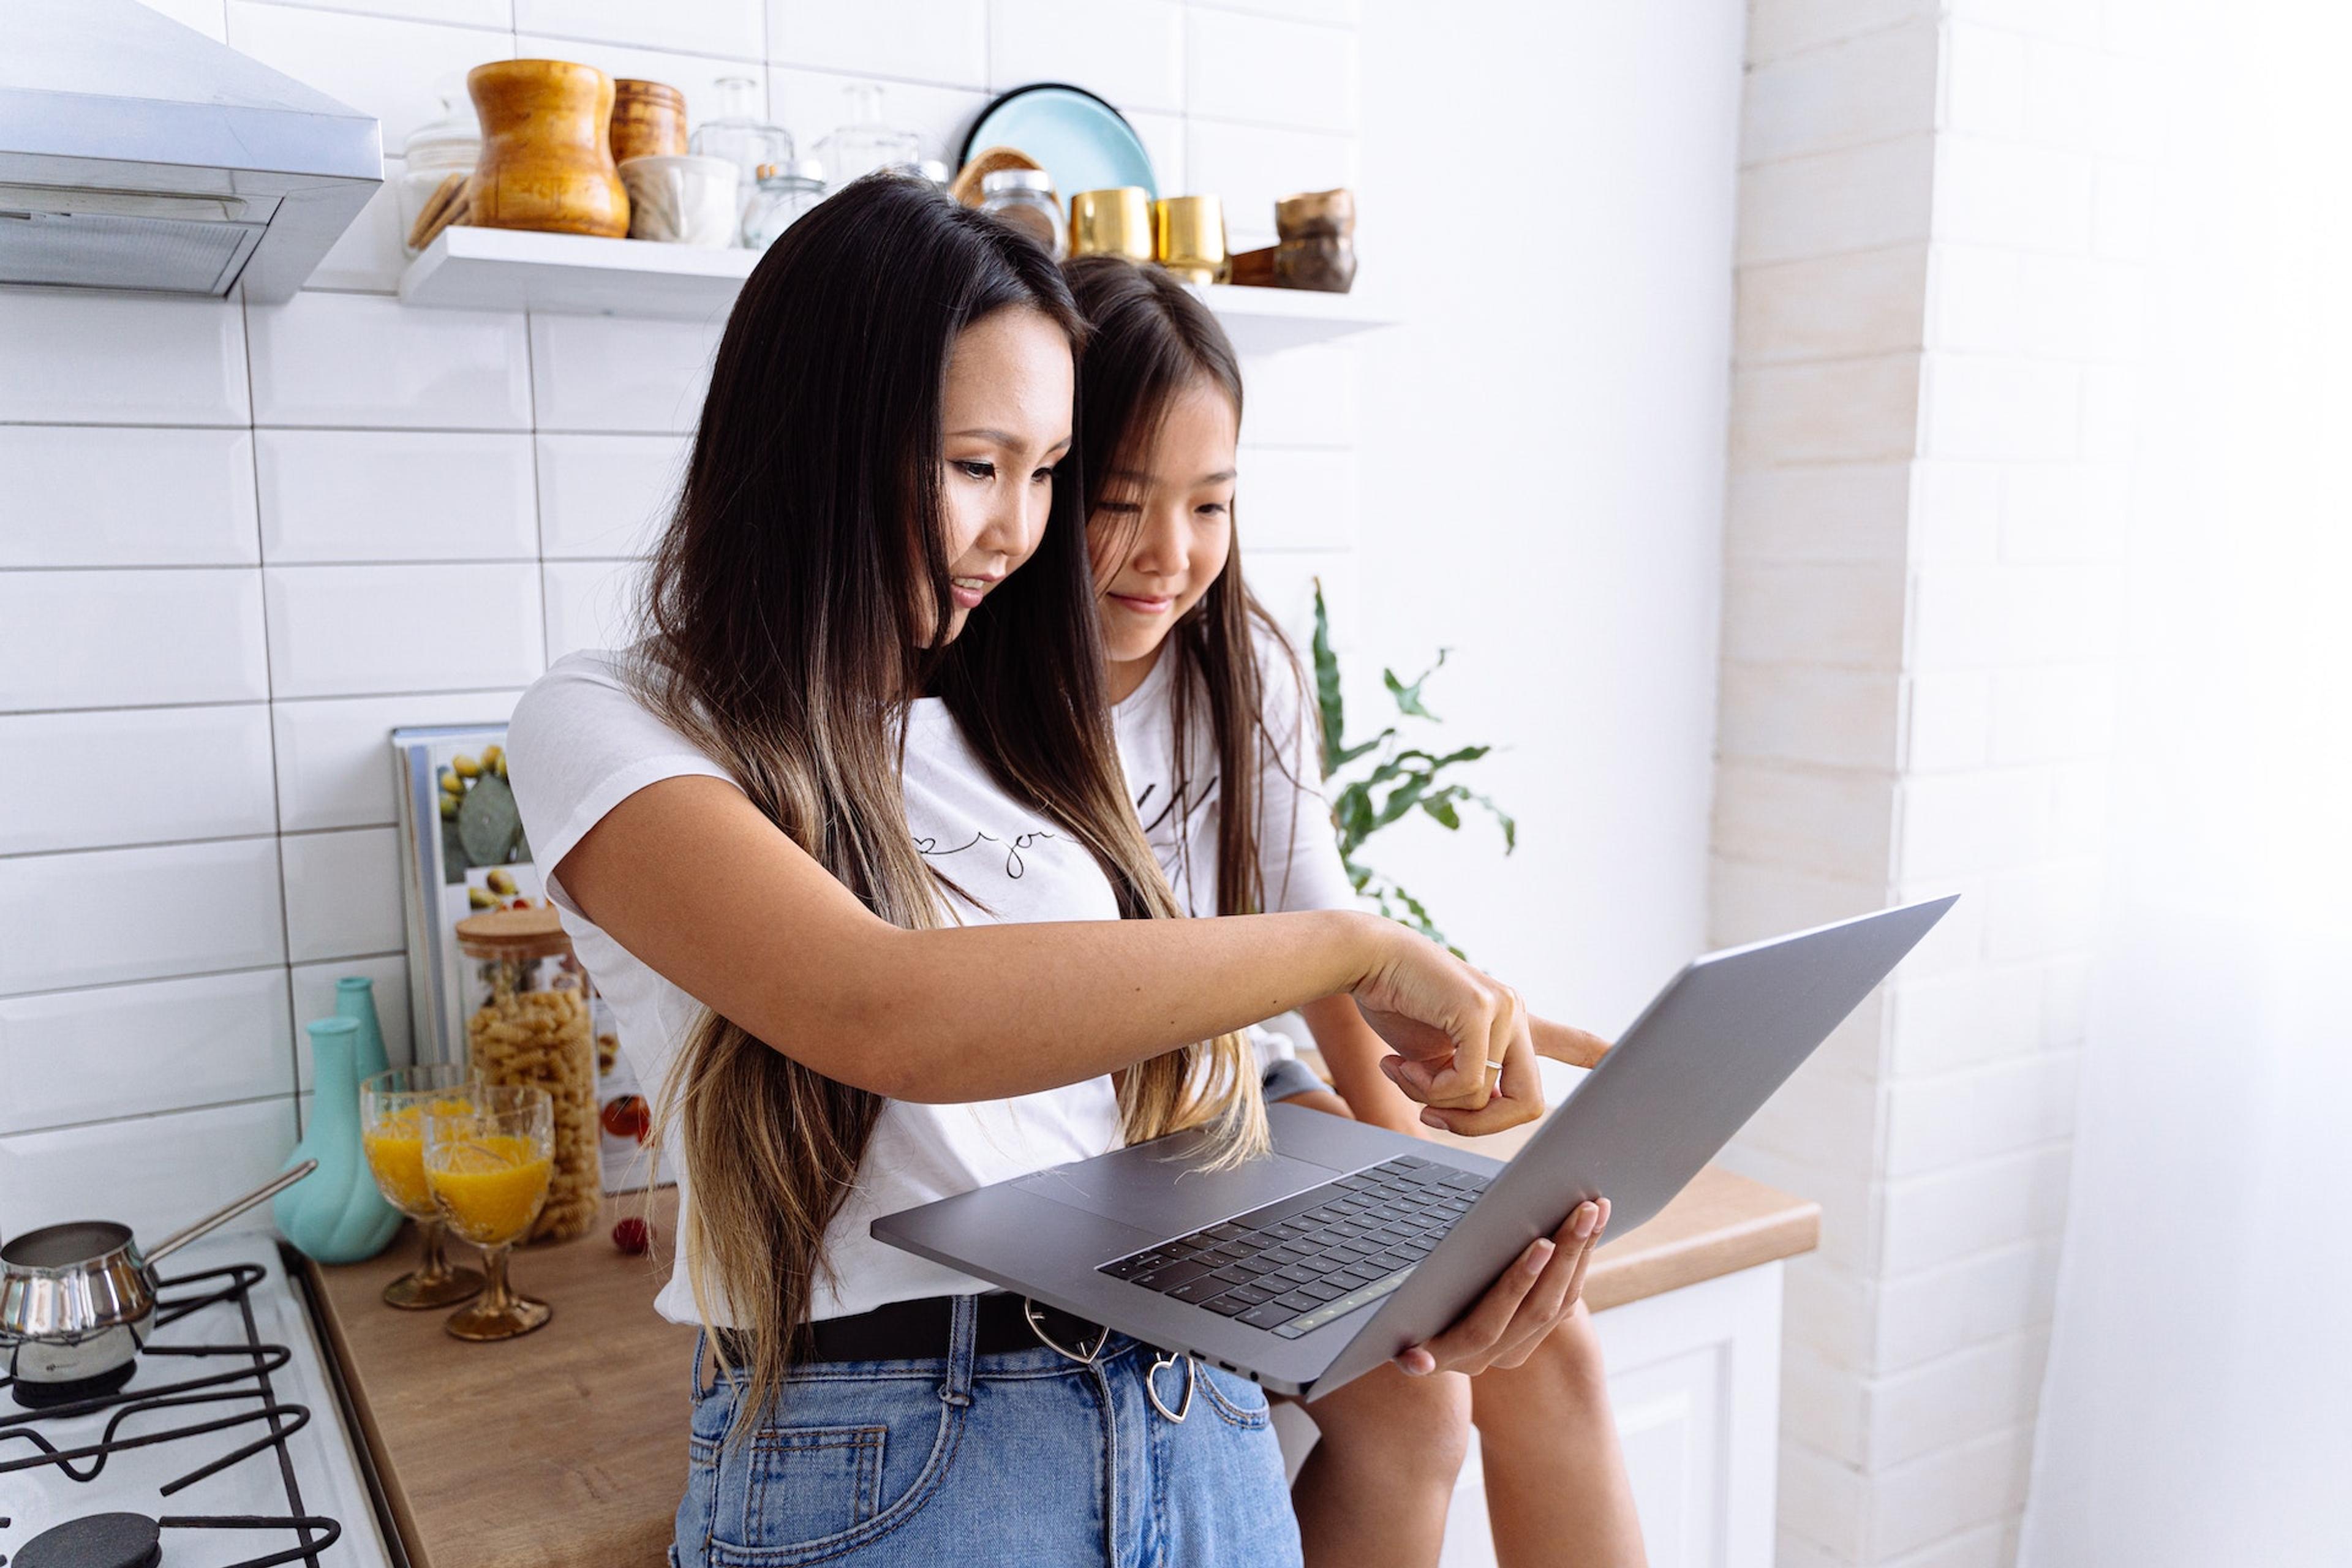 A young woman and a girl stand together in a kitchen looking at a laptop